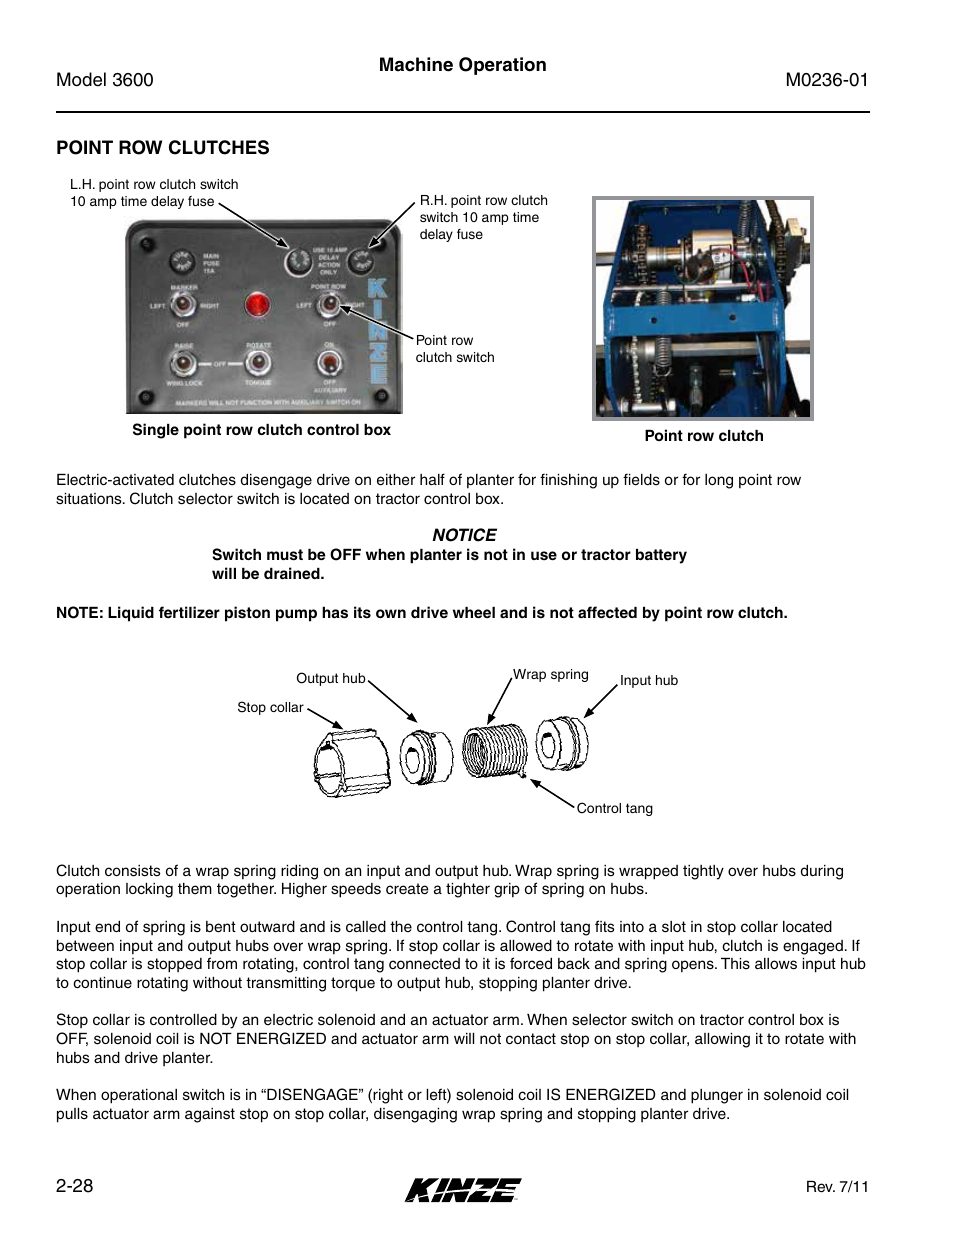 Point row clutches, Point row clutches -28 | Kinze 3600 Lift and Rotate Planter Rev. 7/14 User Manual | Page 38 / 172